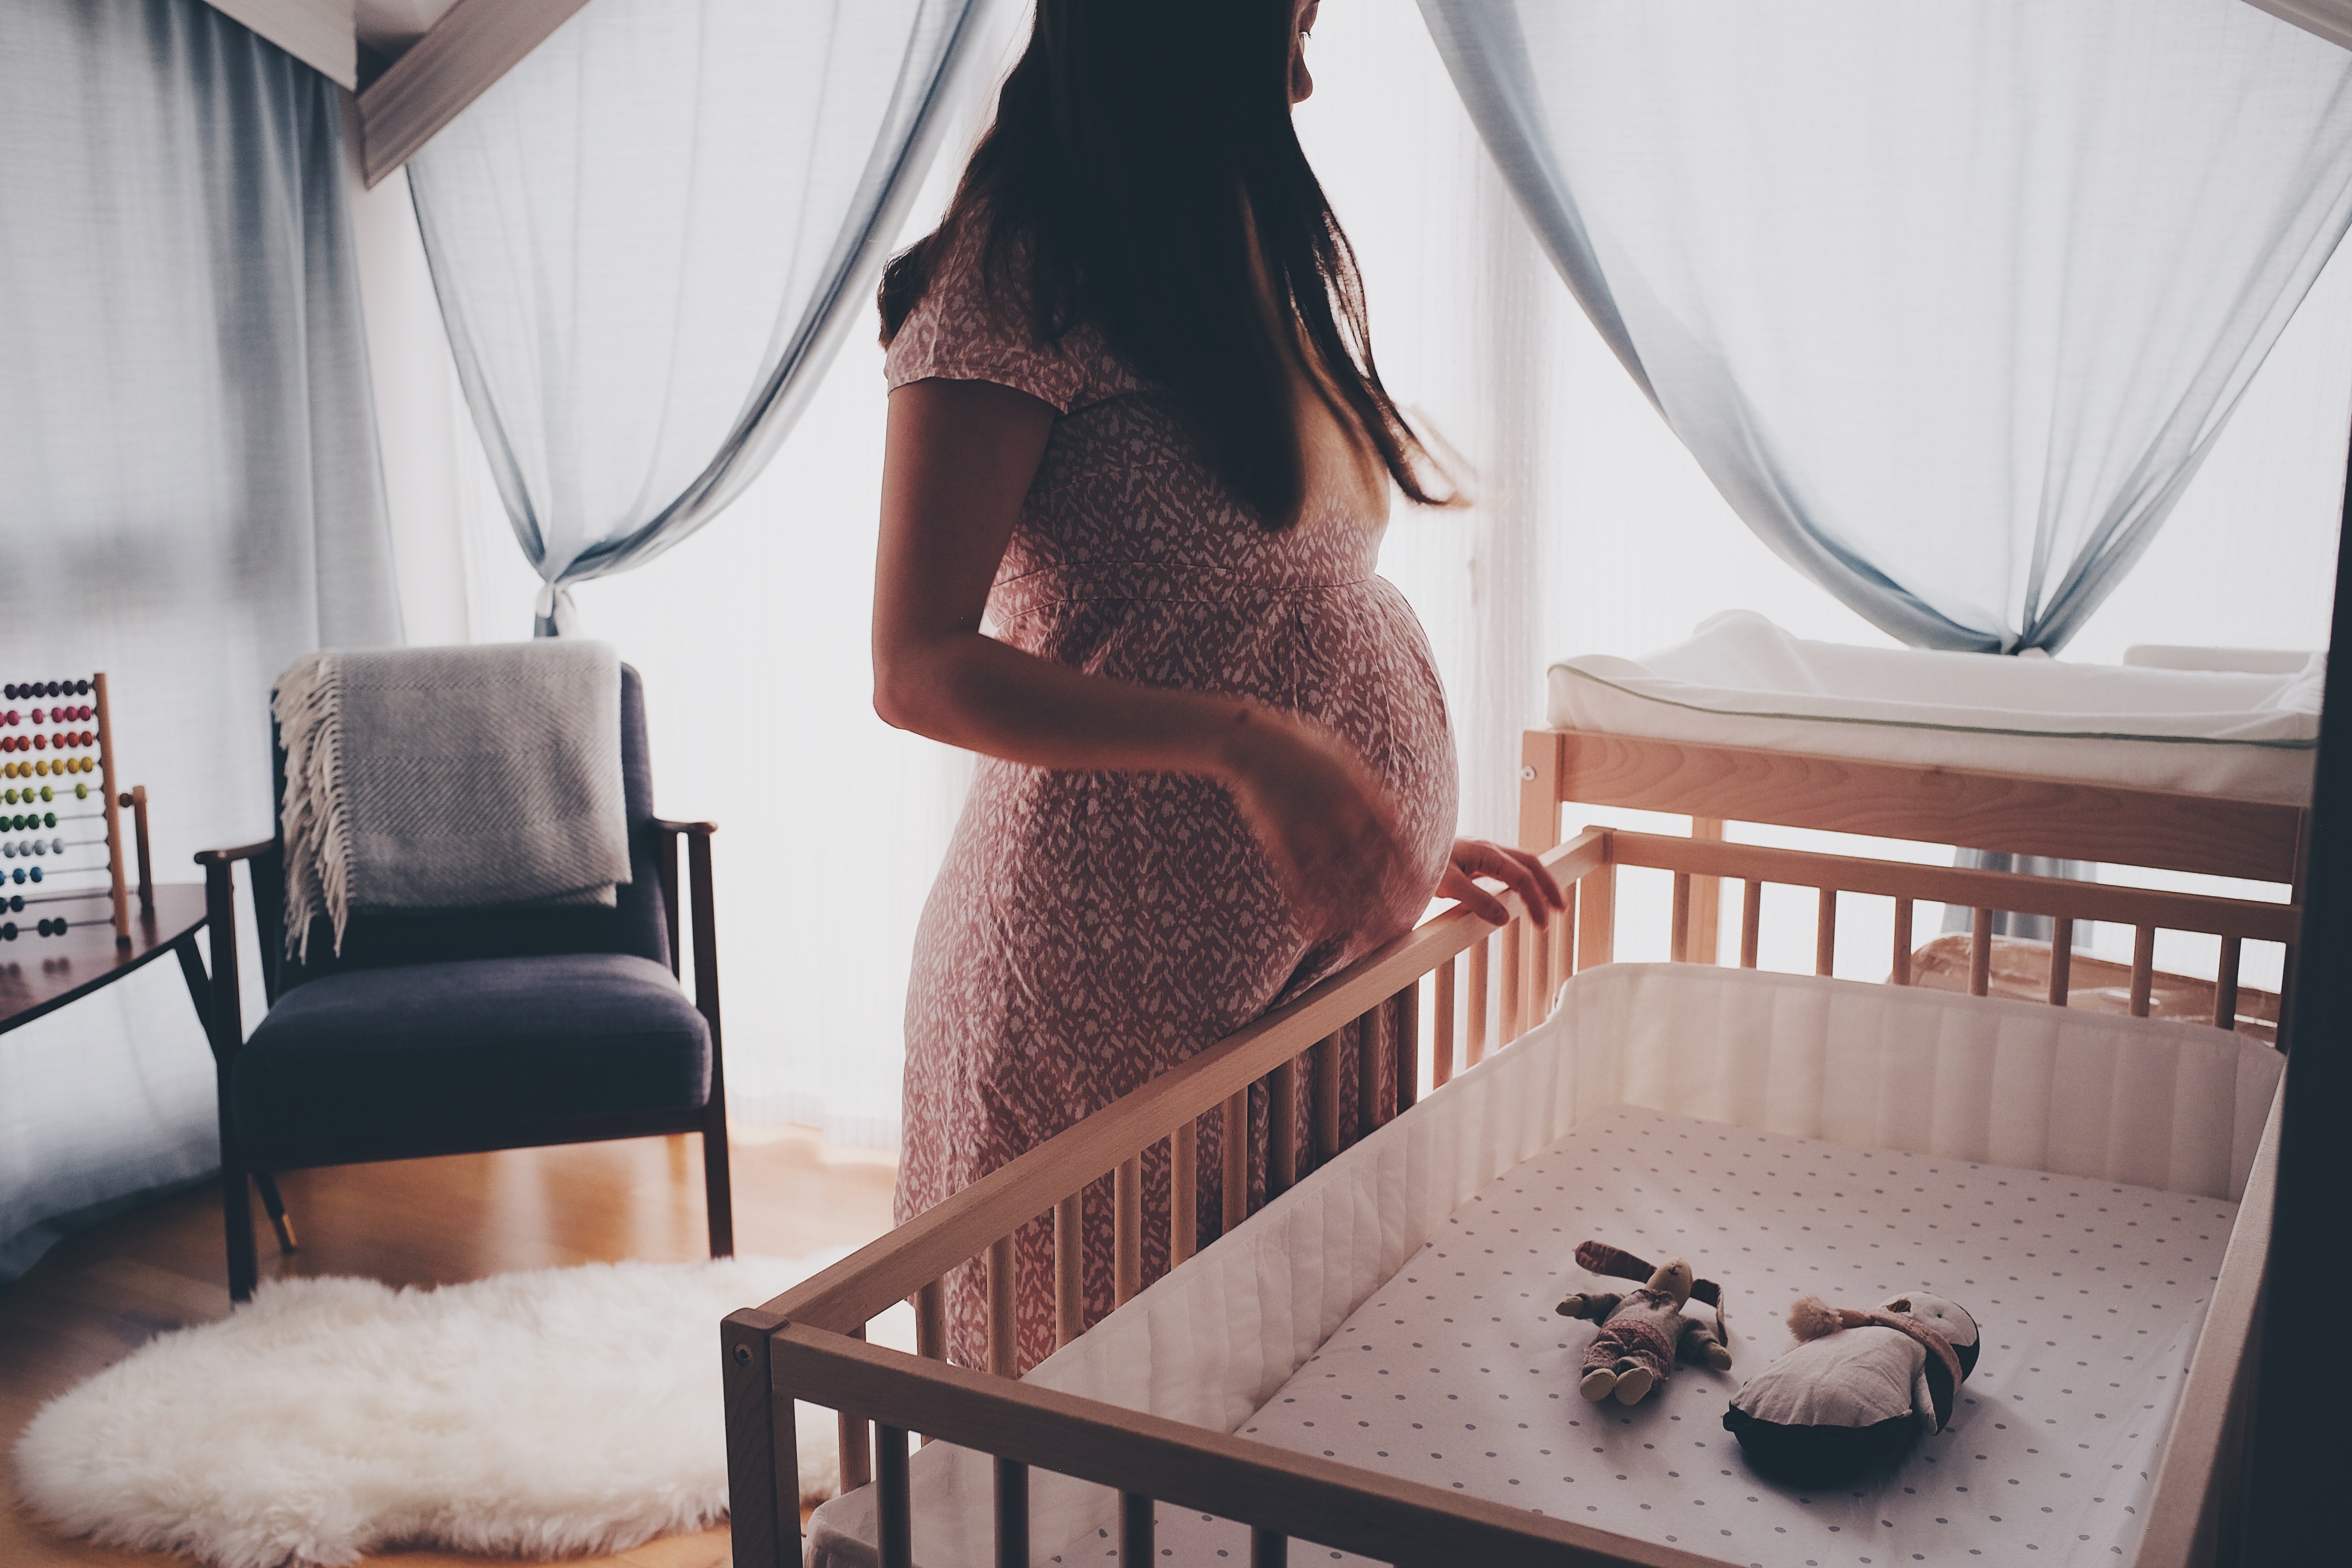 "When she was eighteen, your mom fell pregnant." | Source: Unsplash